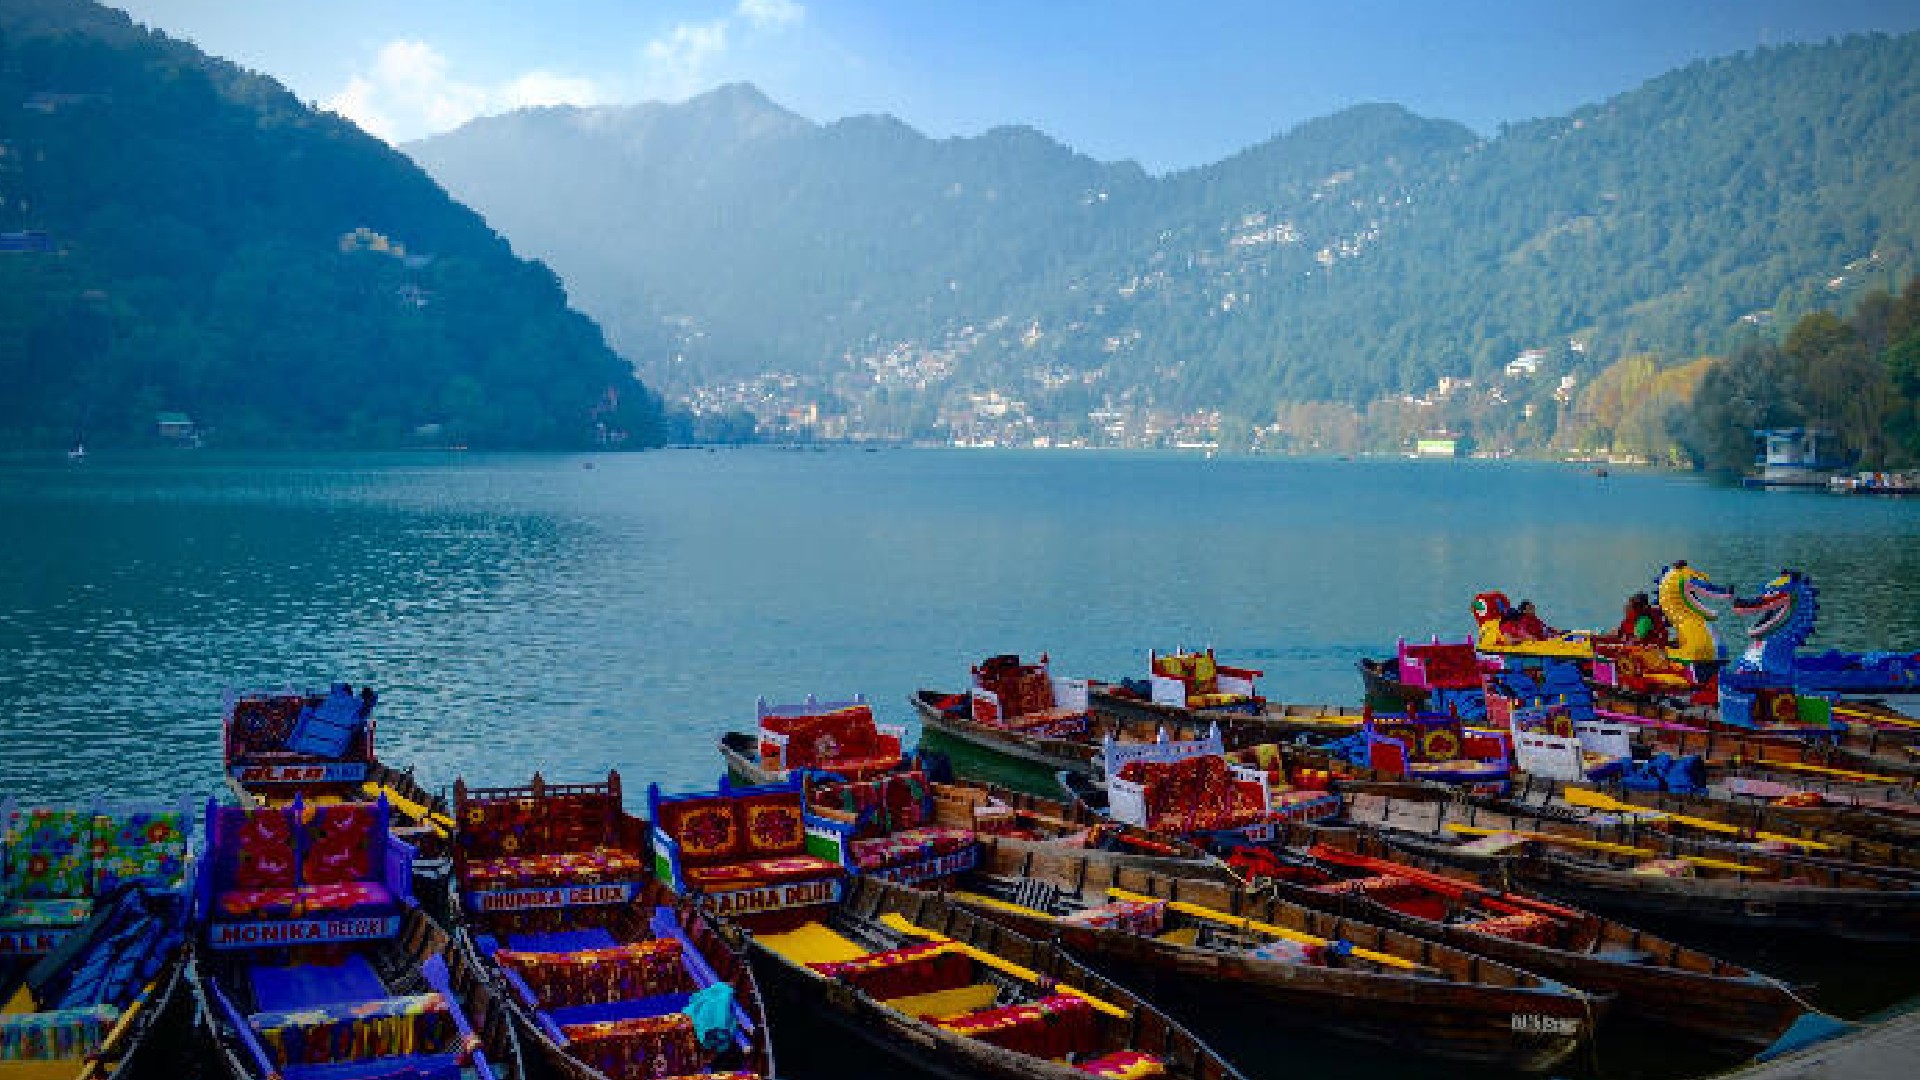 23 Places To Visit Near Nainital For A Revitalizing Vacation In 2021